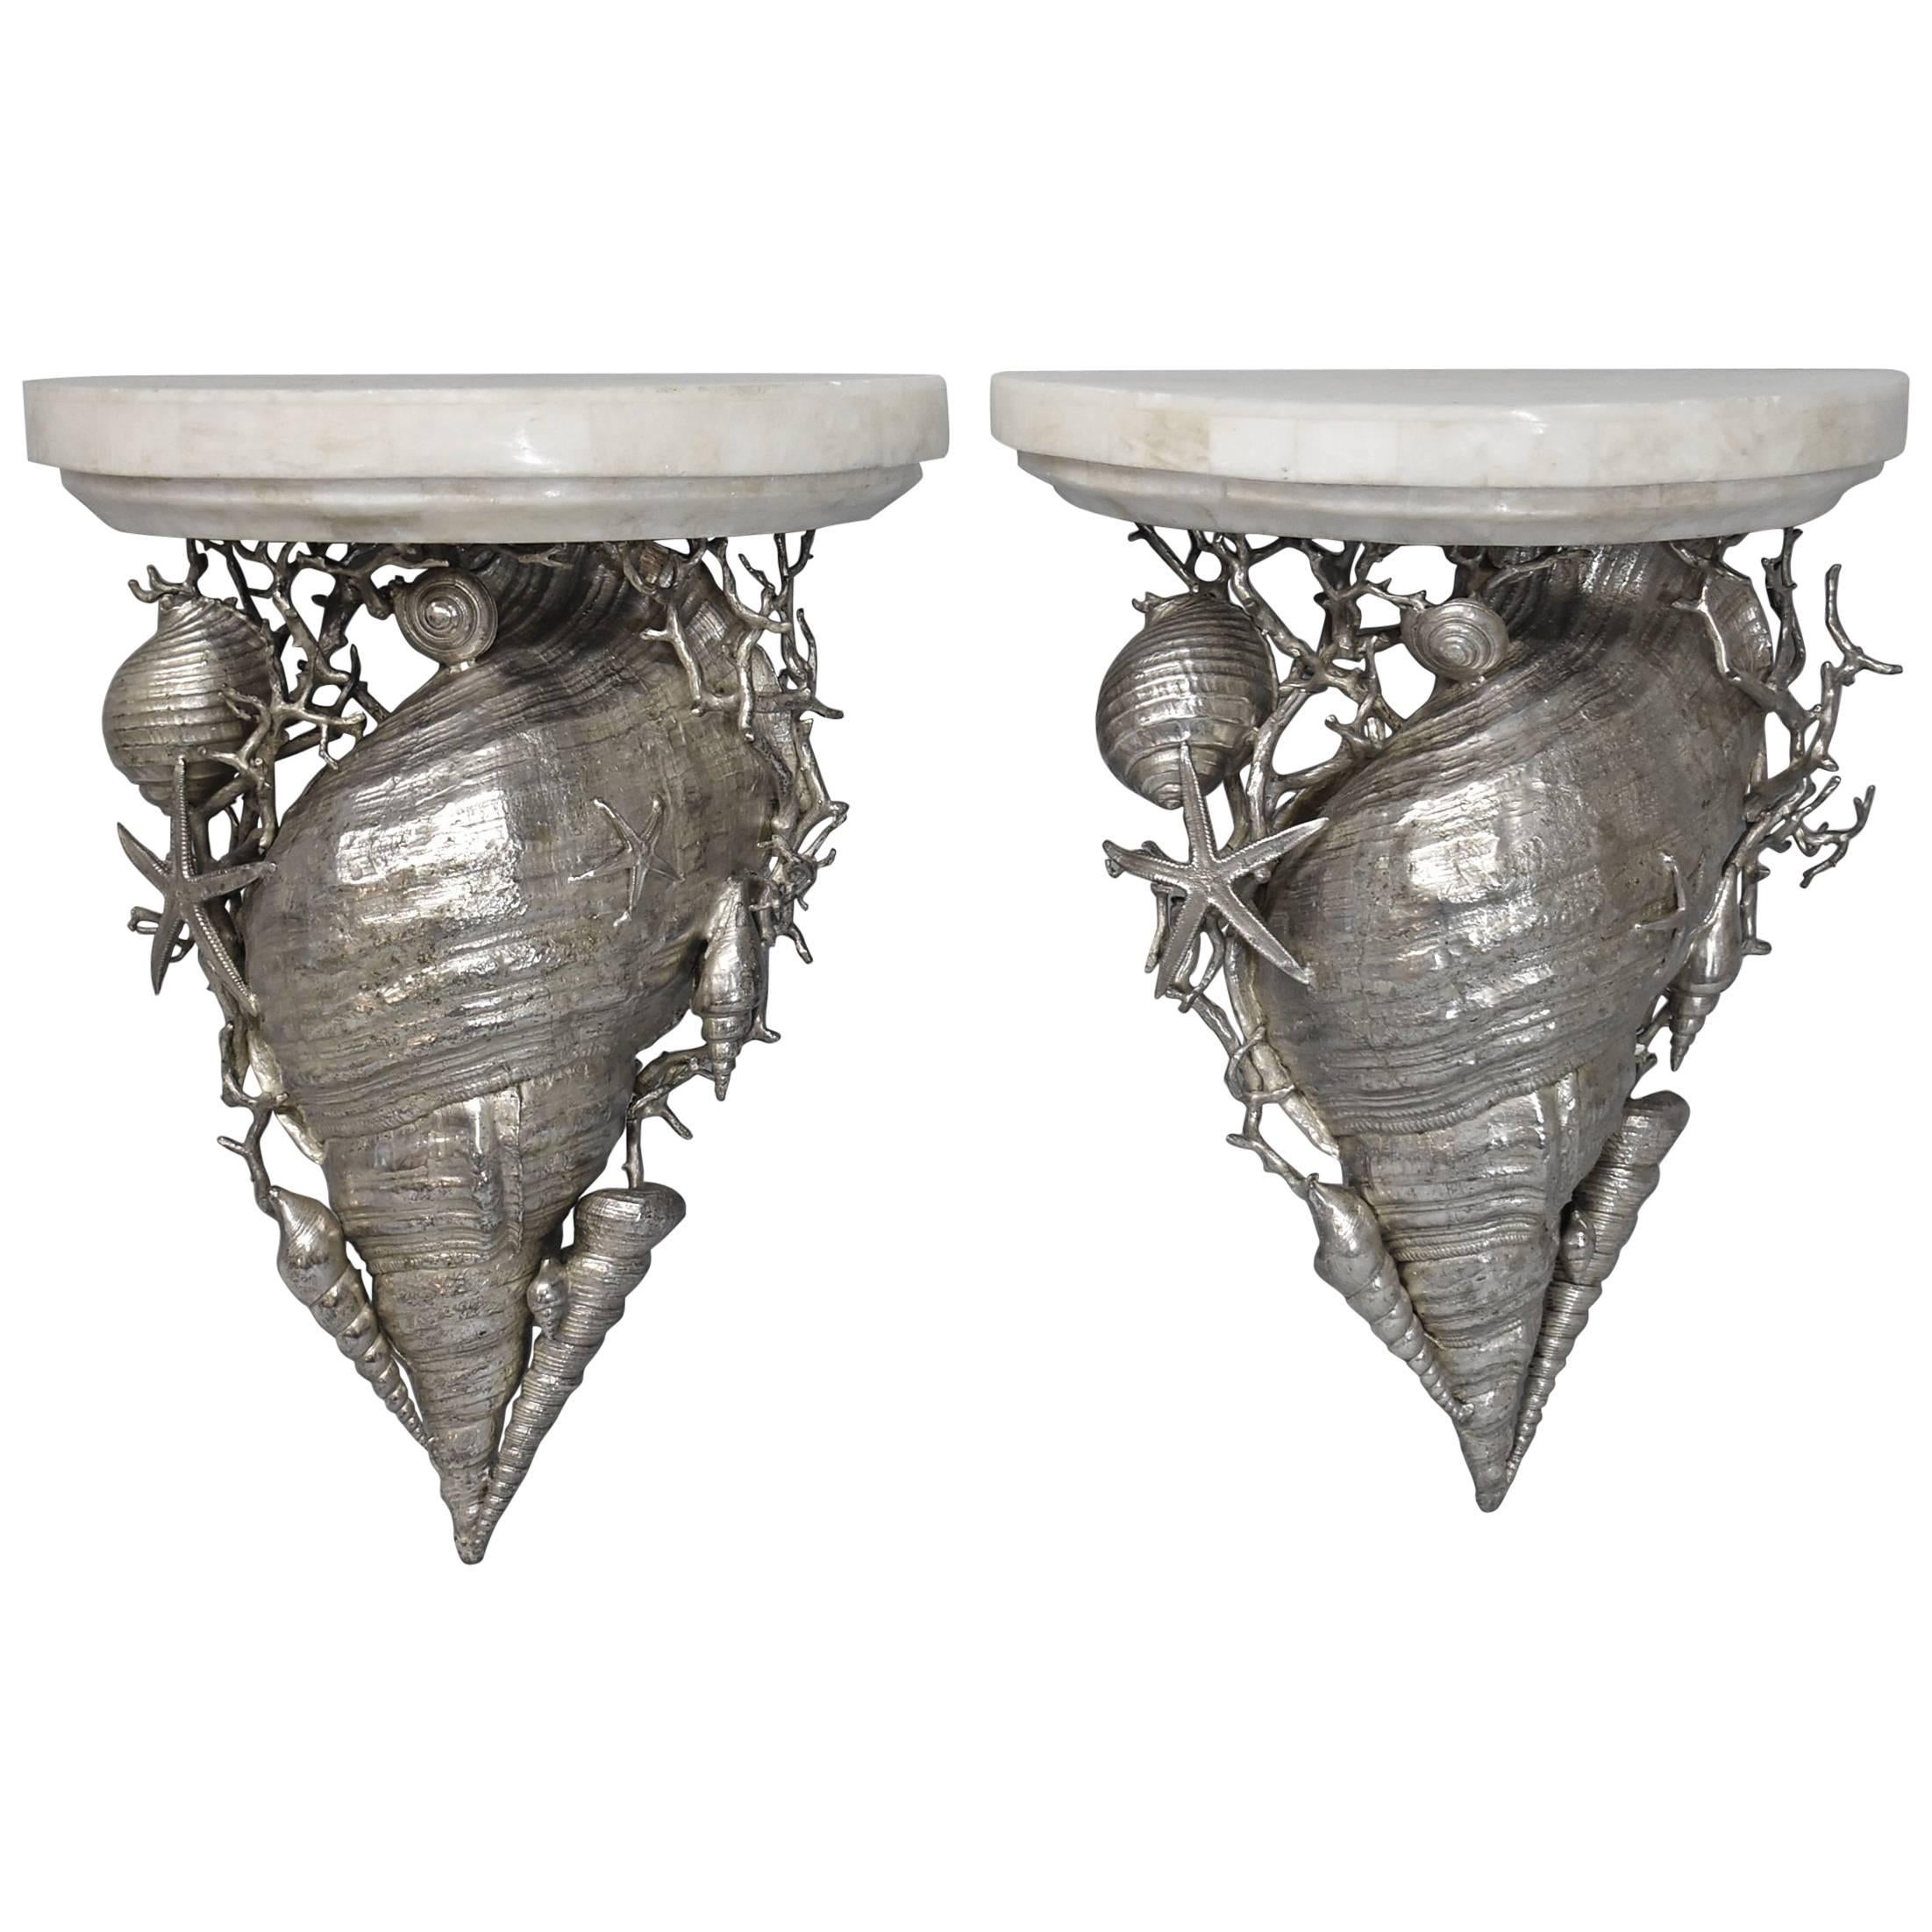 Pair of Marble-Top Silver Plated Brass Shell Wall Shelves by Maitland Smith